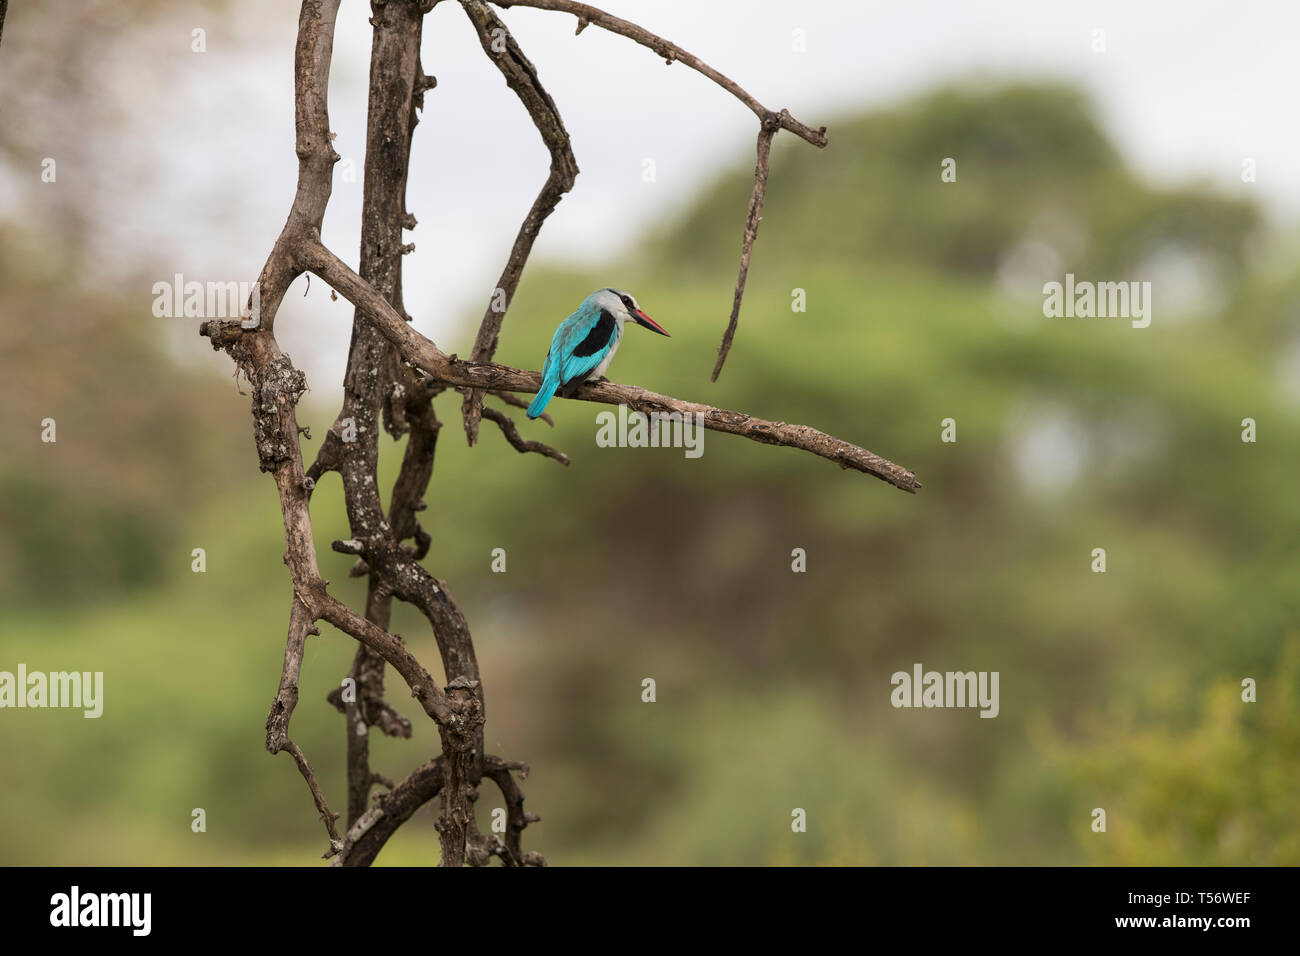 Woodland kingfisher sitting on a branch Stock Photo